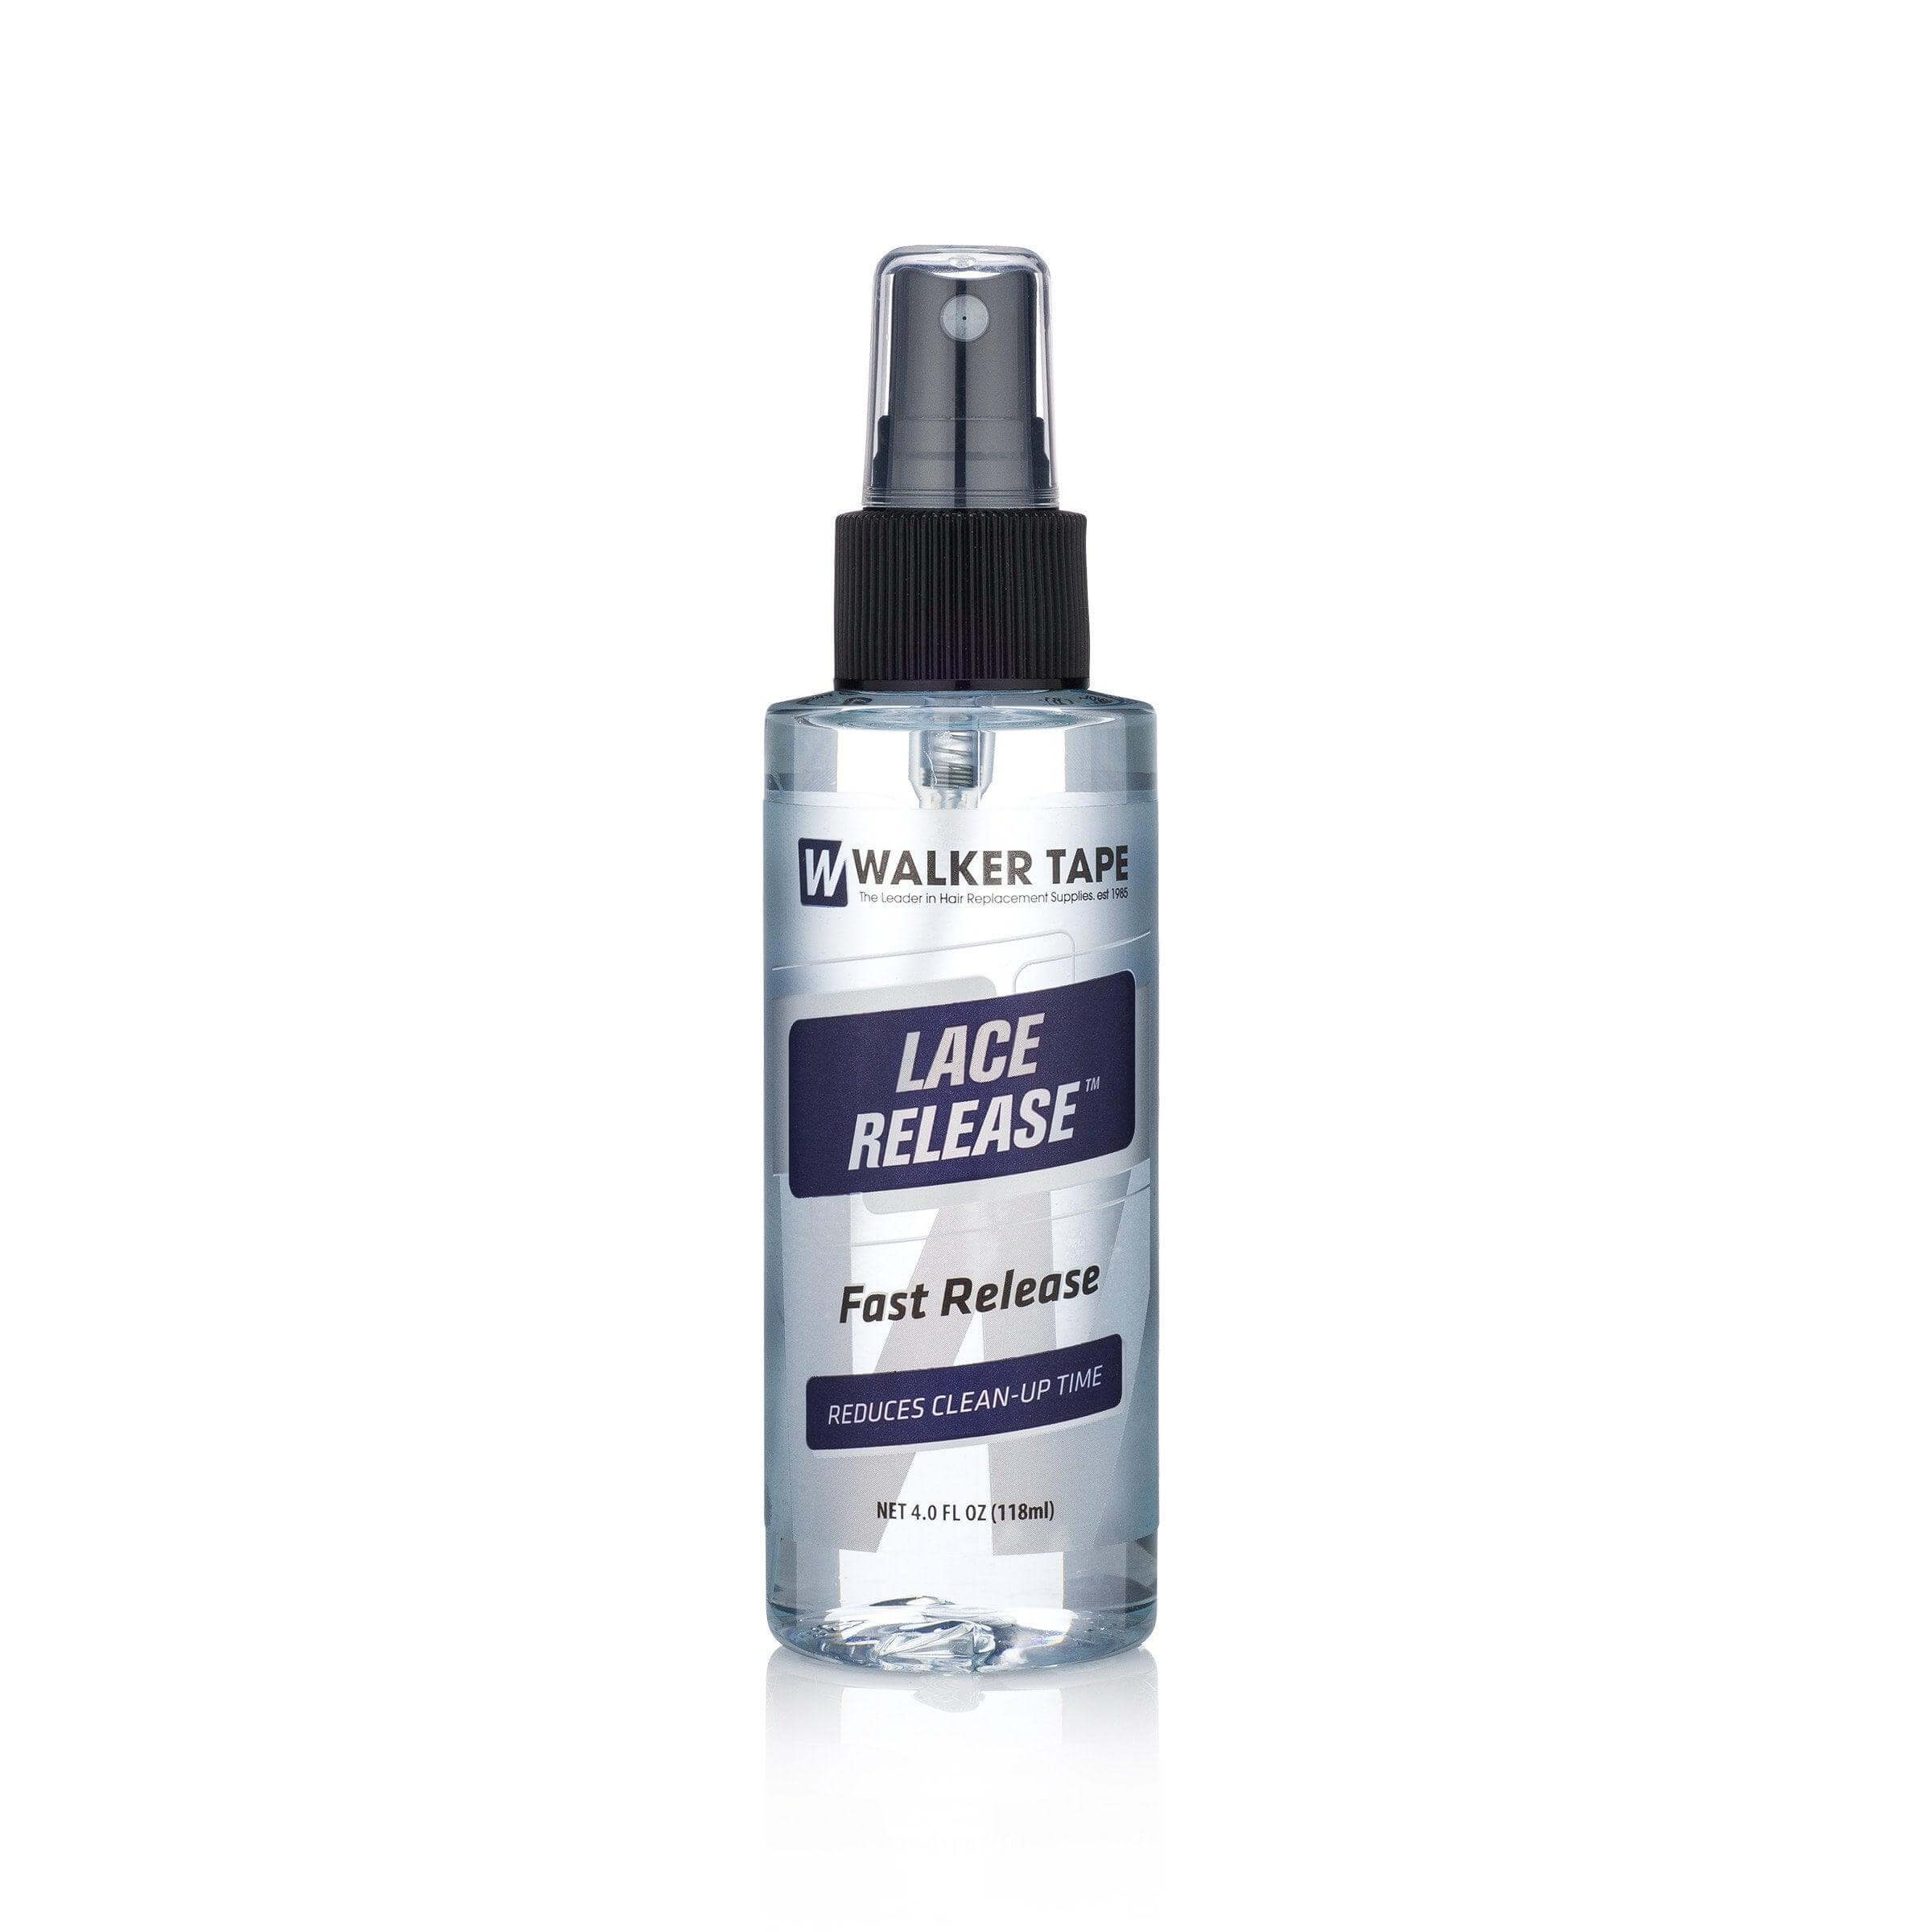 Walker Tape's Lace Release Adhesive Remover Spray 4oz